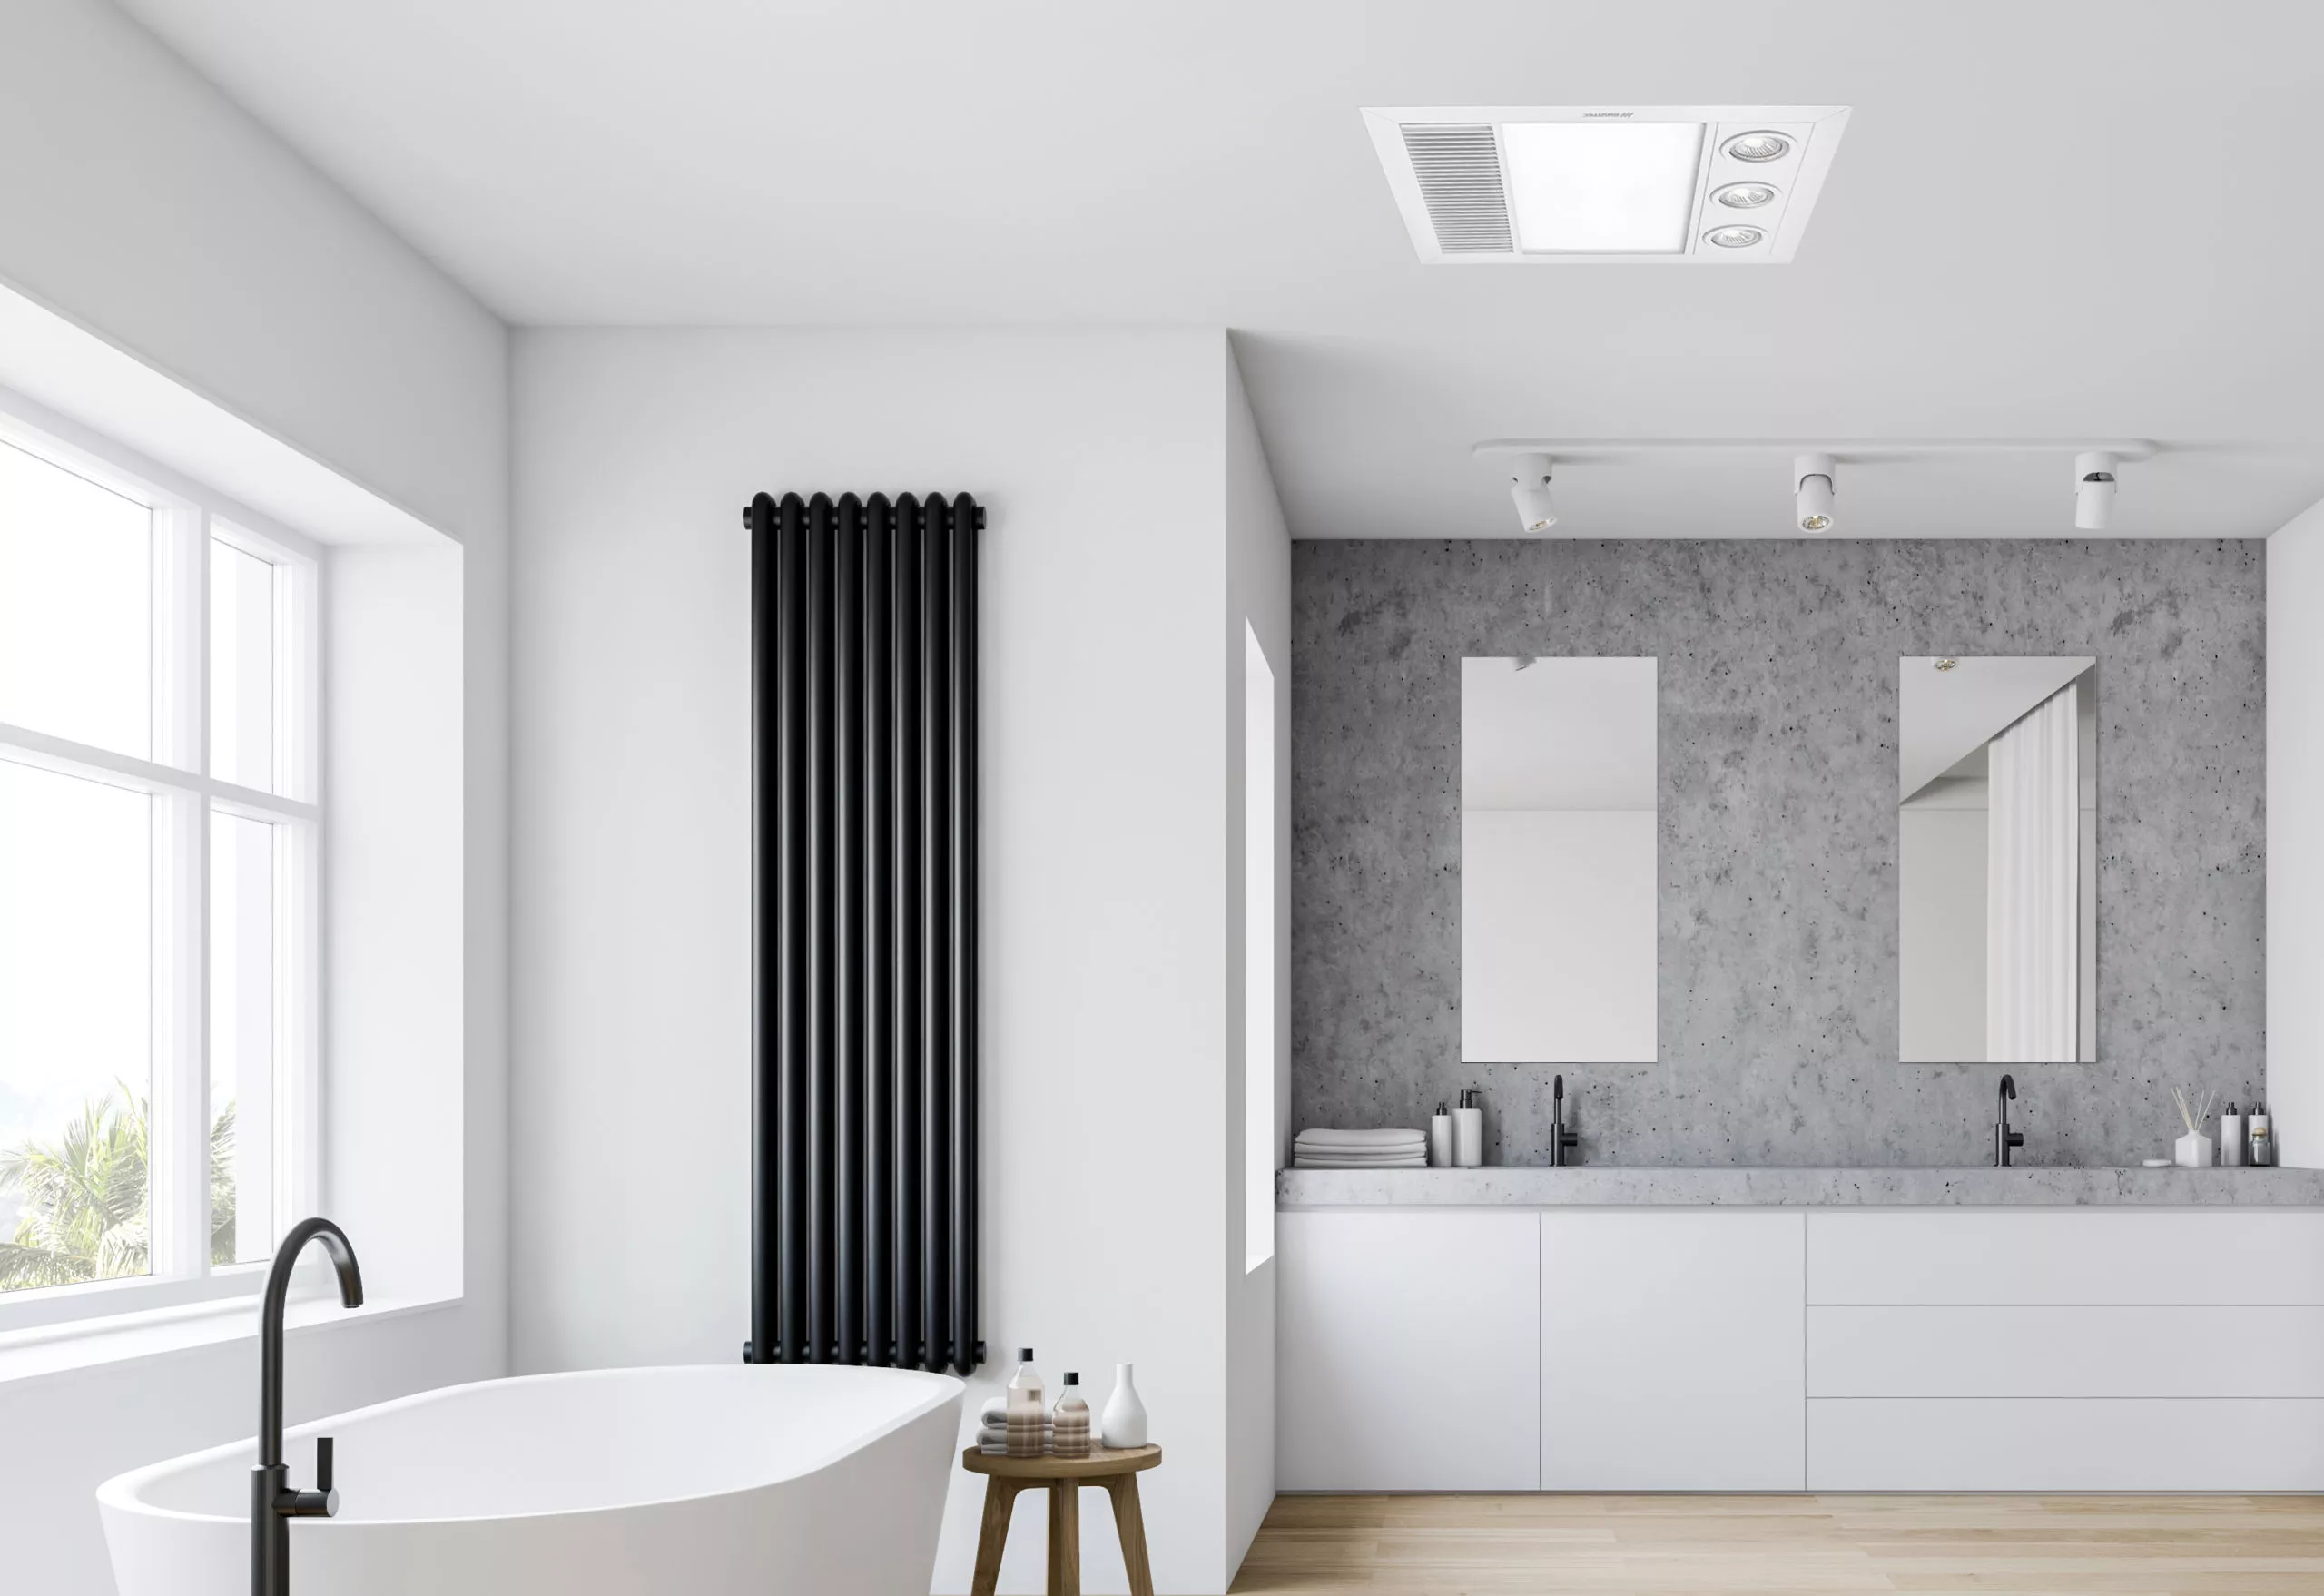 What Is The Benefit Of Bathroom Exhaust Fan